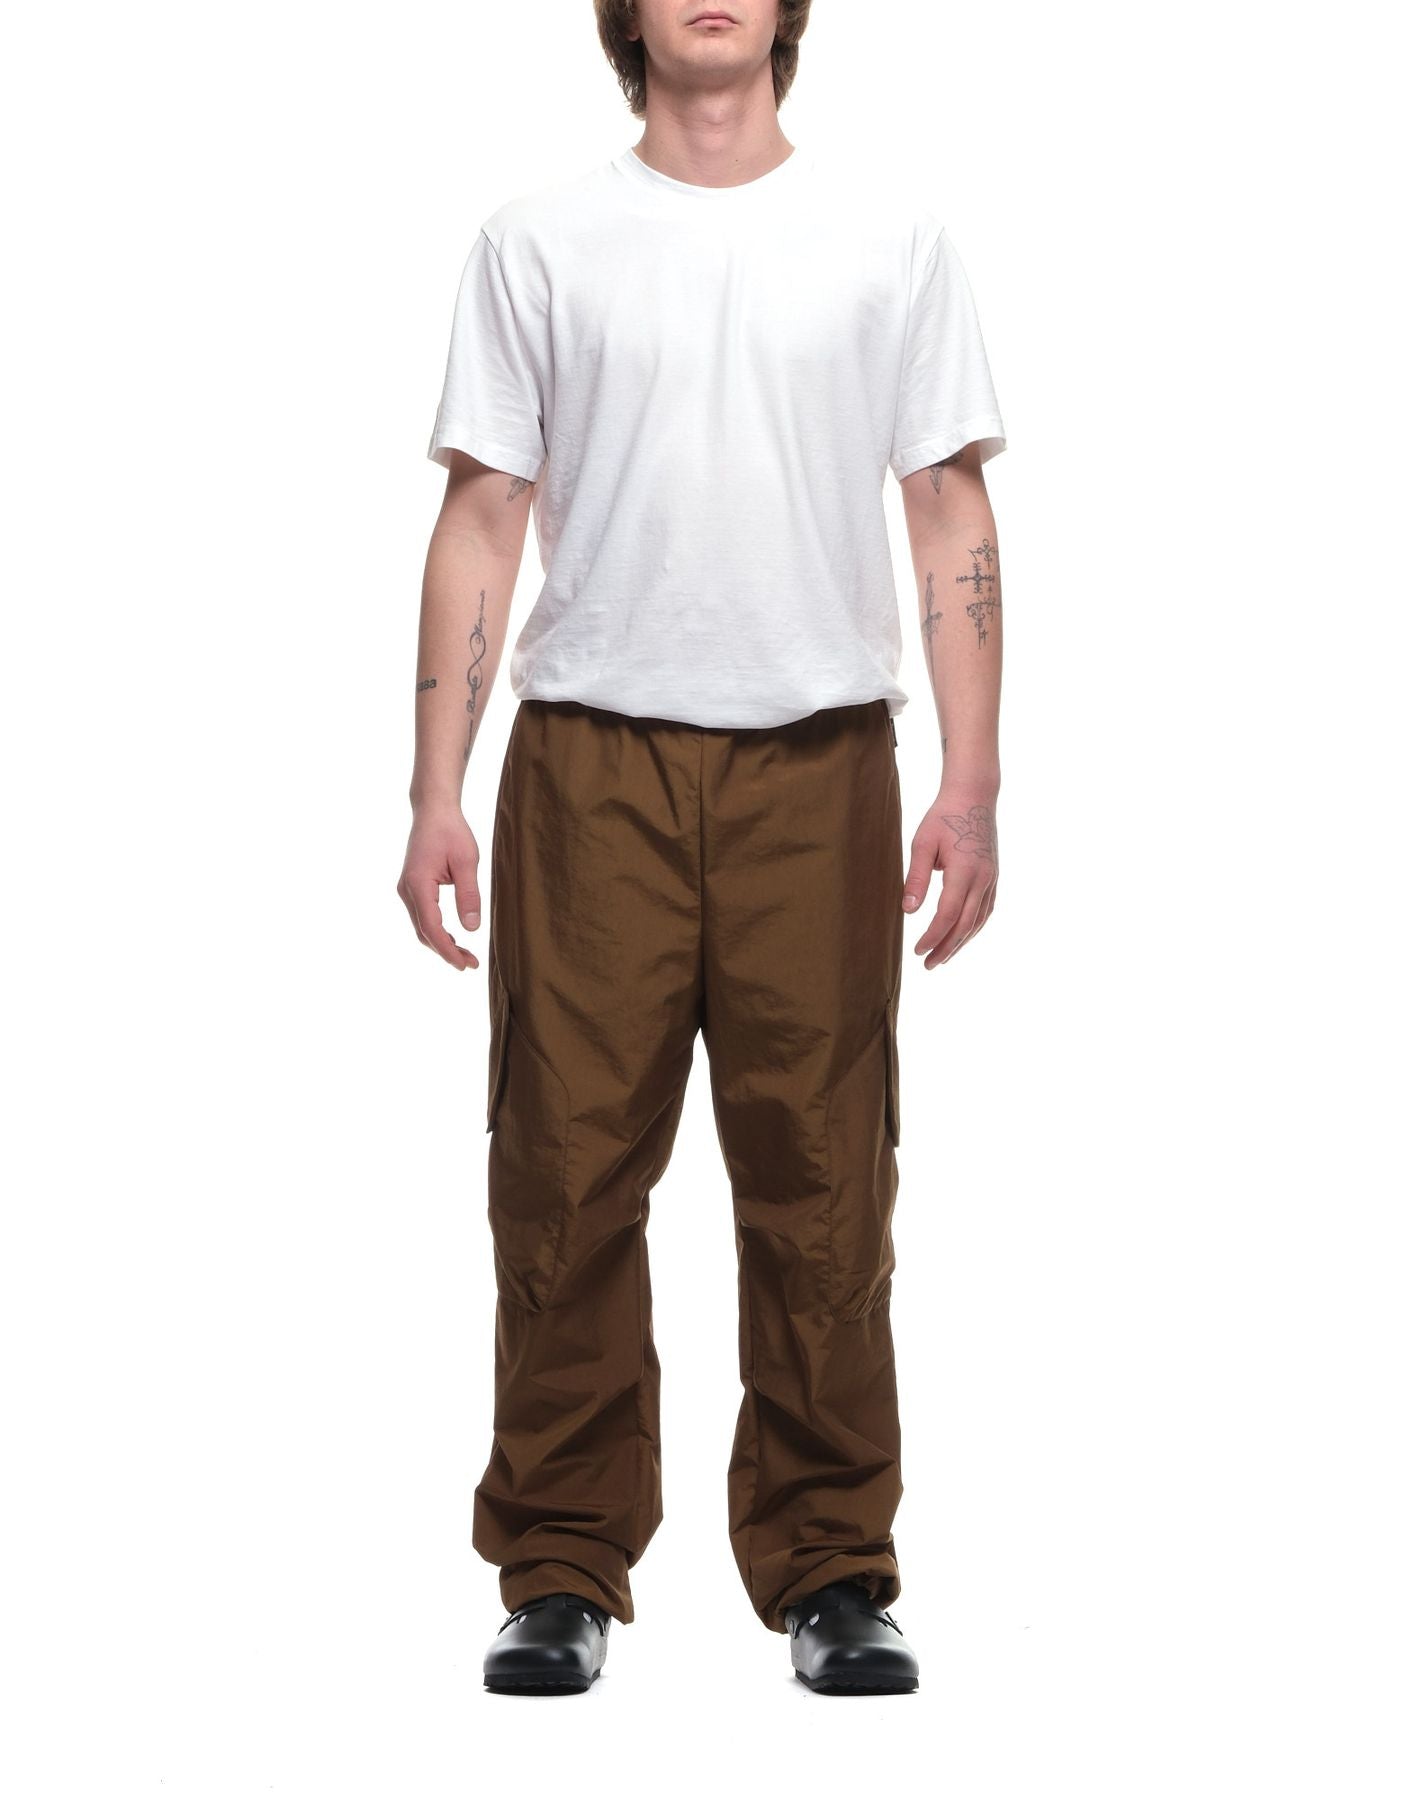 Pants for man TORRE MIGGIANO F711 0627 Hevo